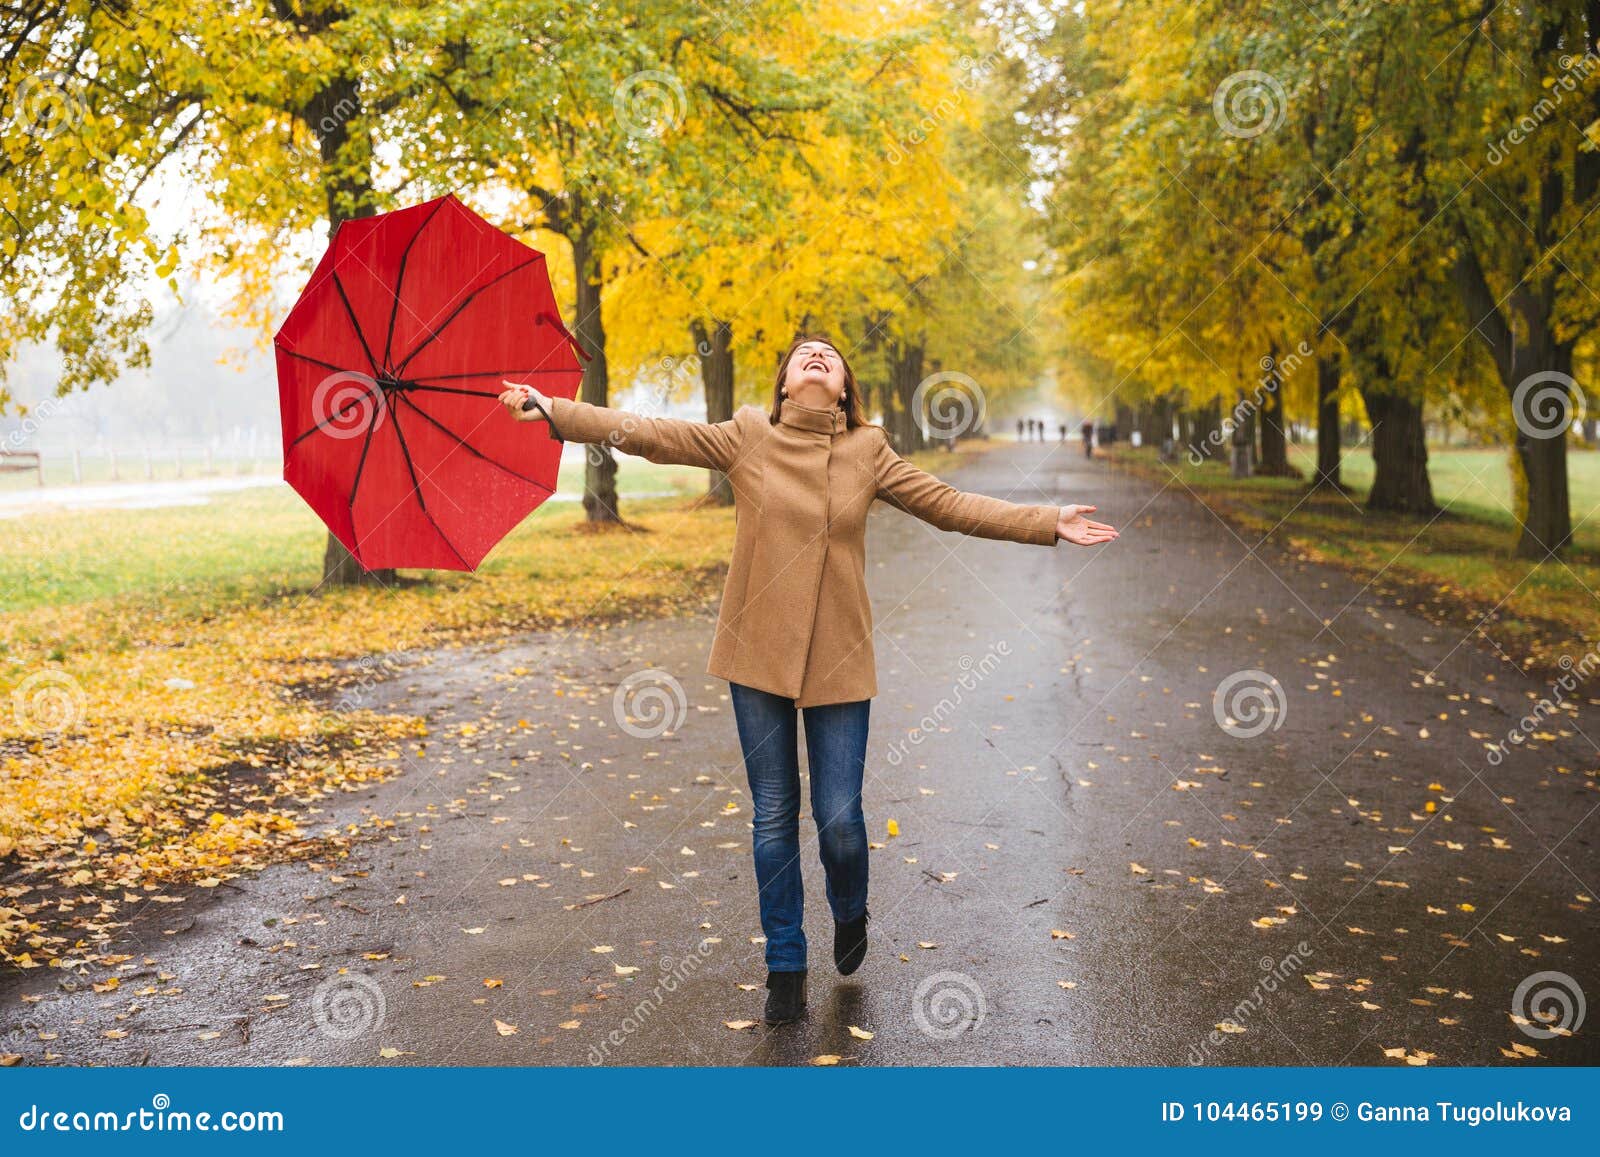 Happy Woman with Red Umbrella Walking at the Rain in Beautiful ...